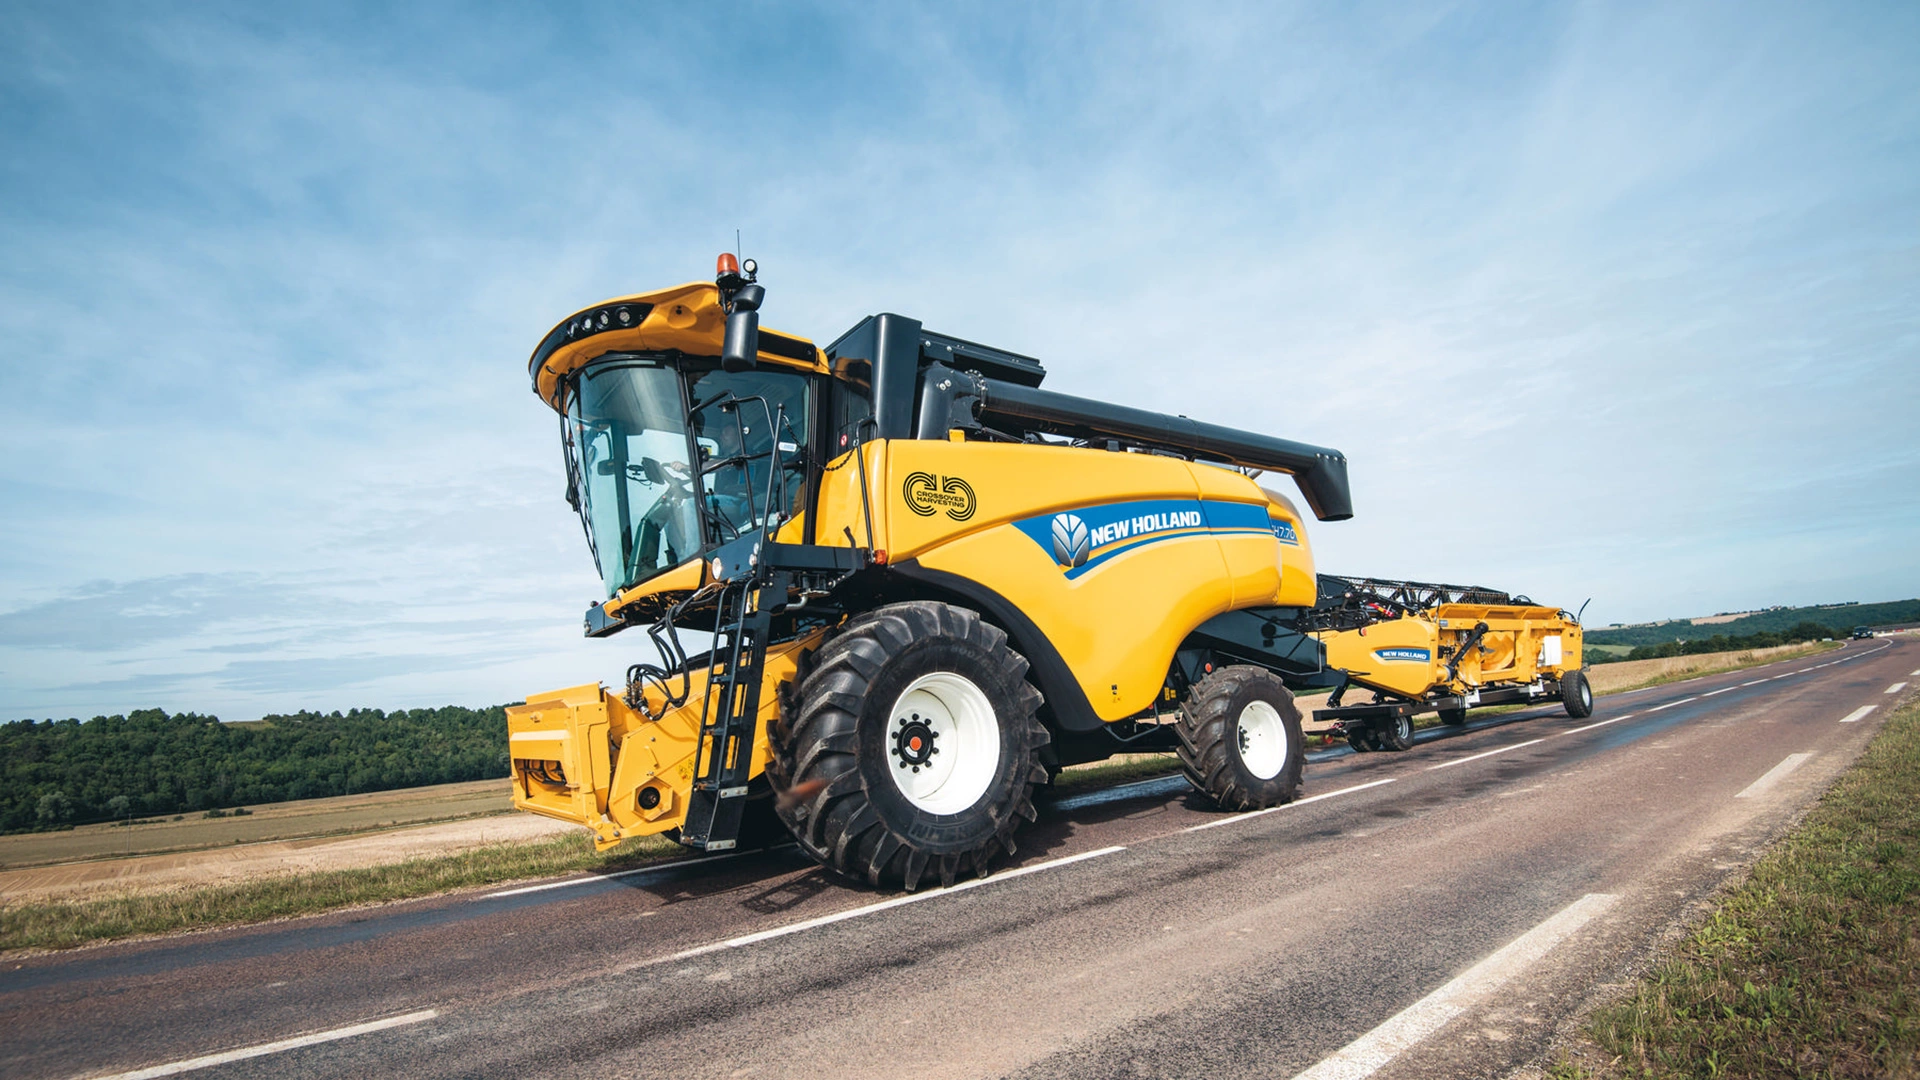 New Holland CH Combine Harvester on the road